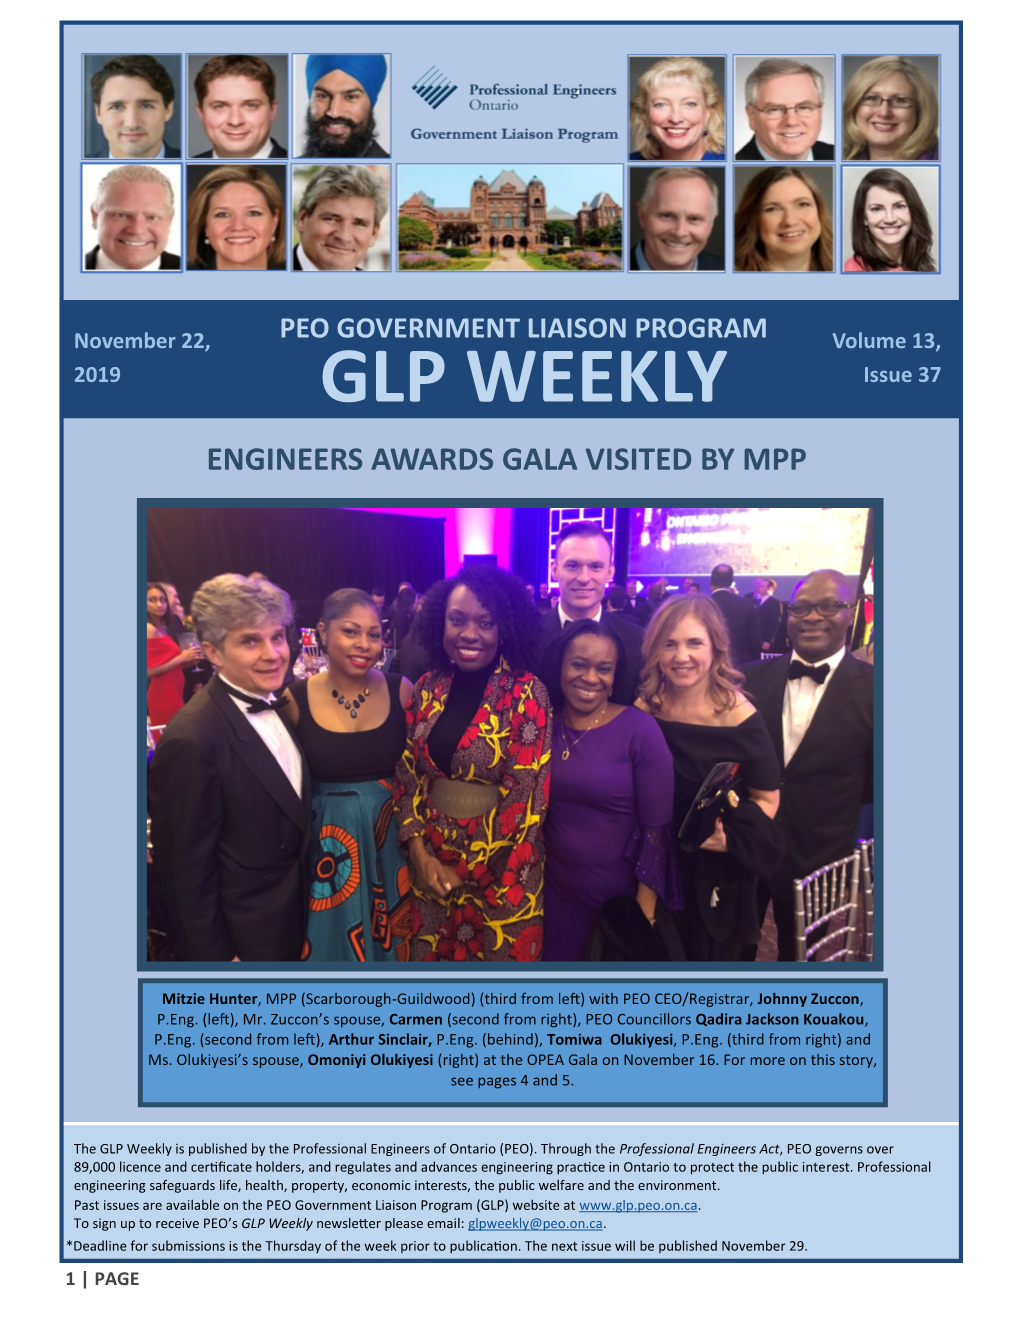 GLP WEEKLY Issue 37 ENGINEERS AWARDS GALA VISITED by MPP